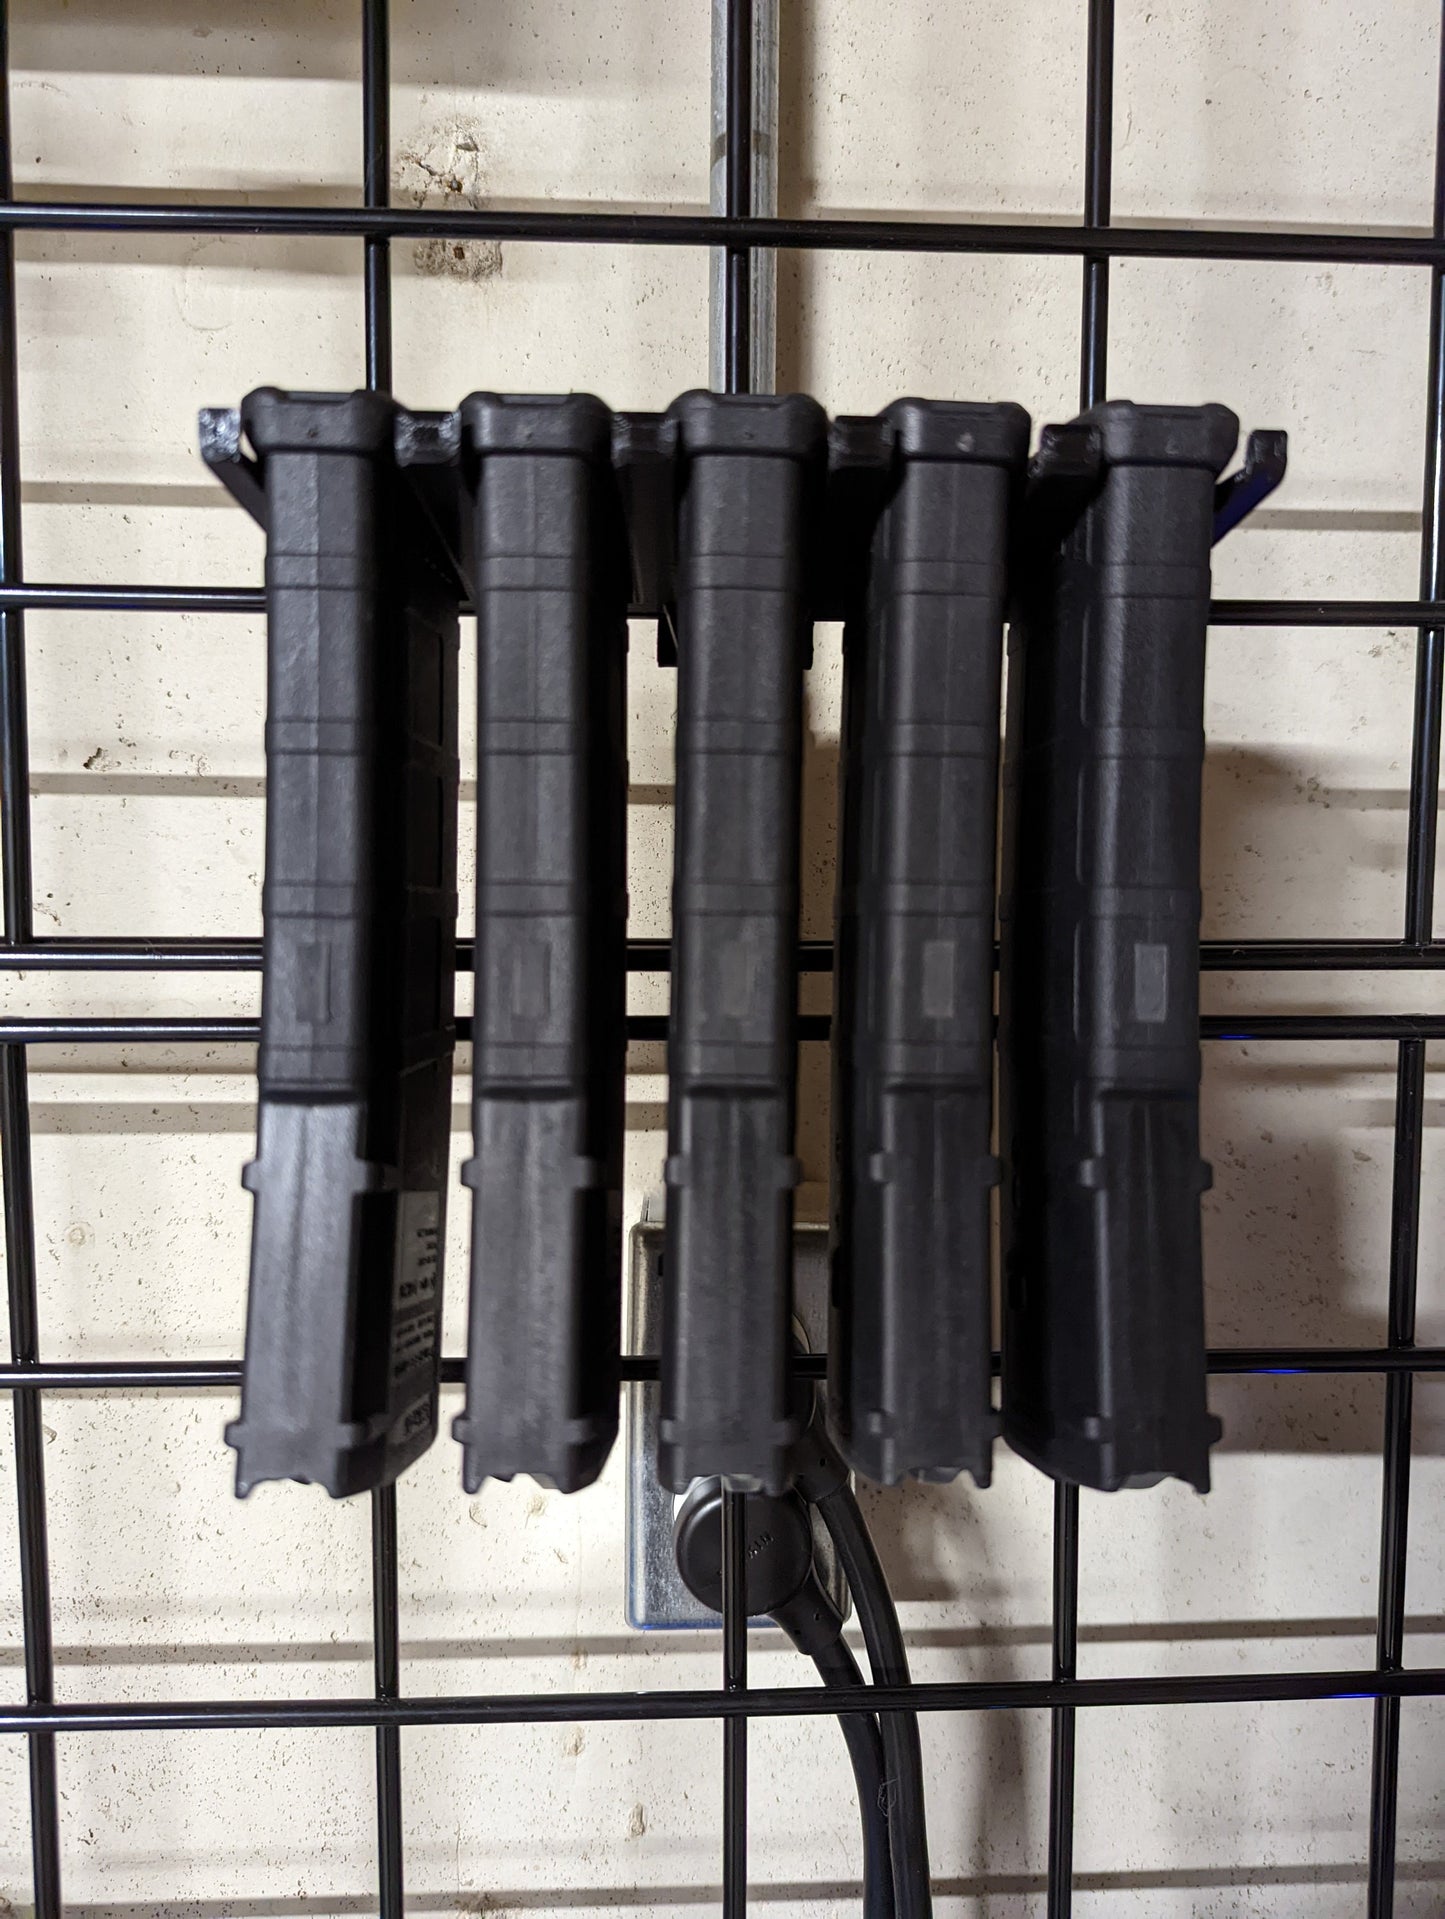 Mount for AR 15 Pmag Mags - Gridwall | Magazine Holder Storage Rack